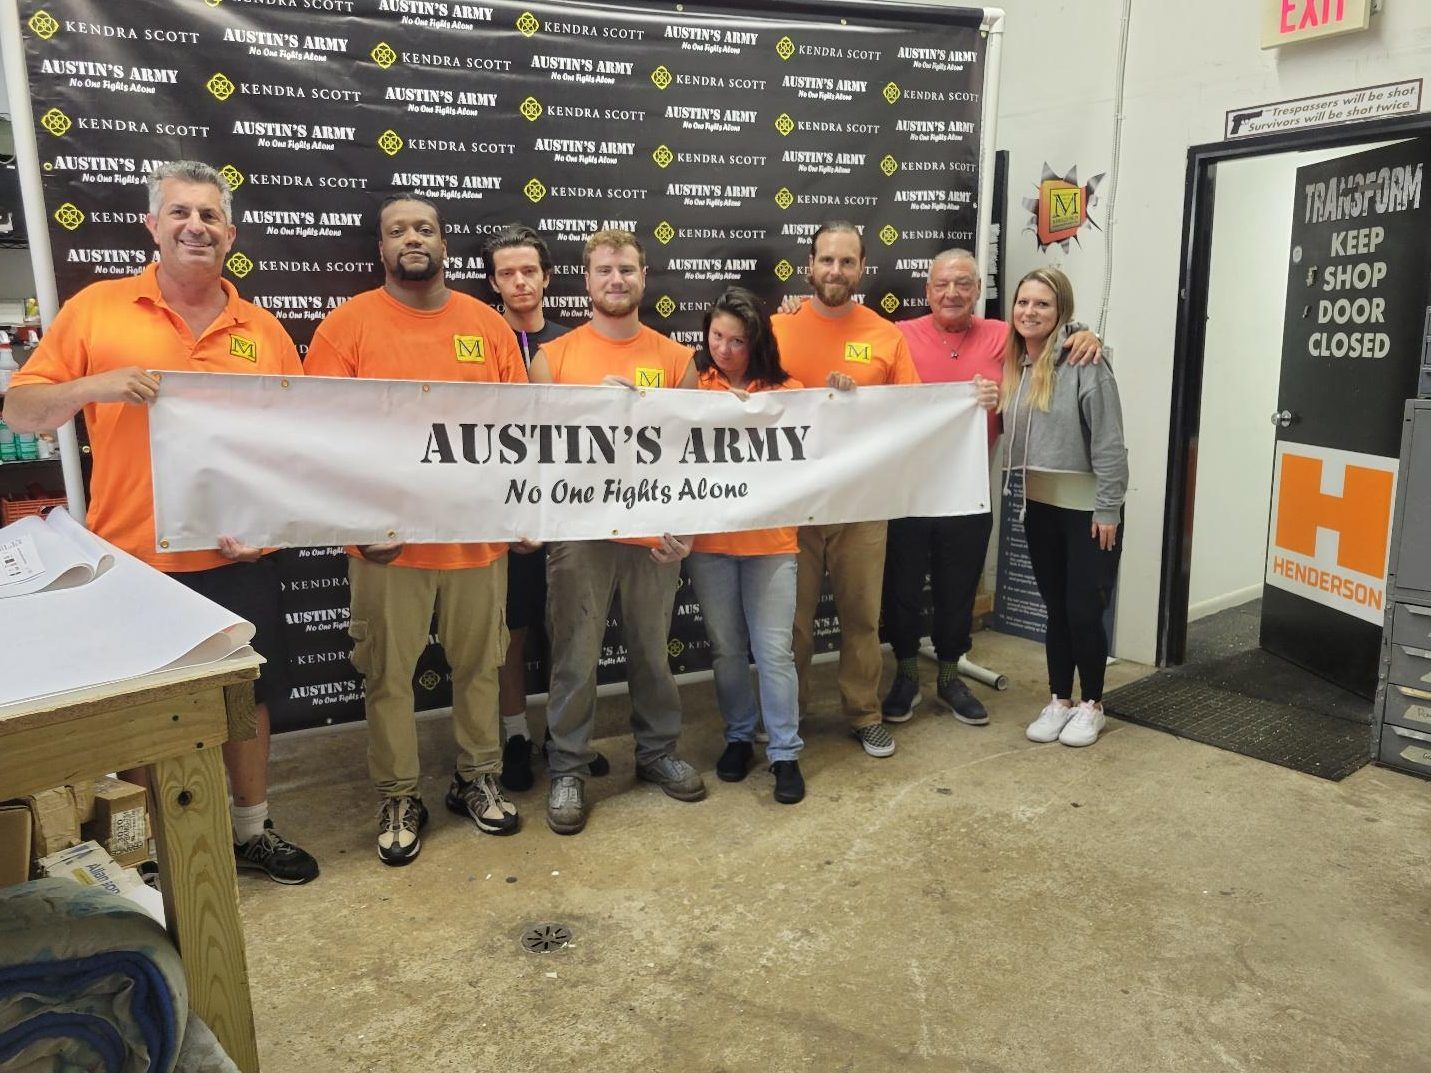 Martino Signs is Proud to Sponsor and Support Austin’s Army, A Local Philadelphia Cause